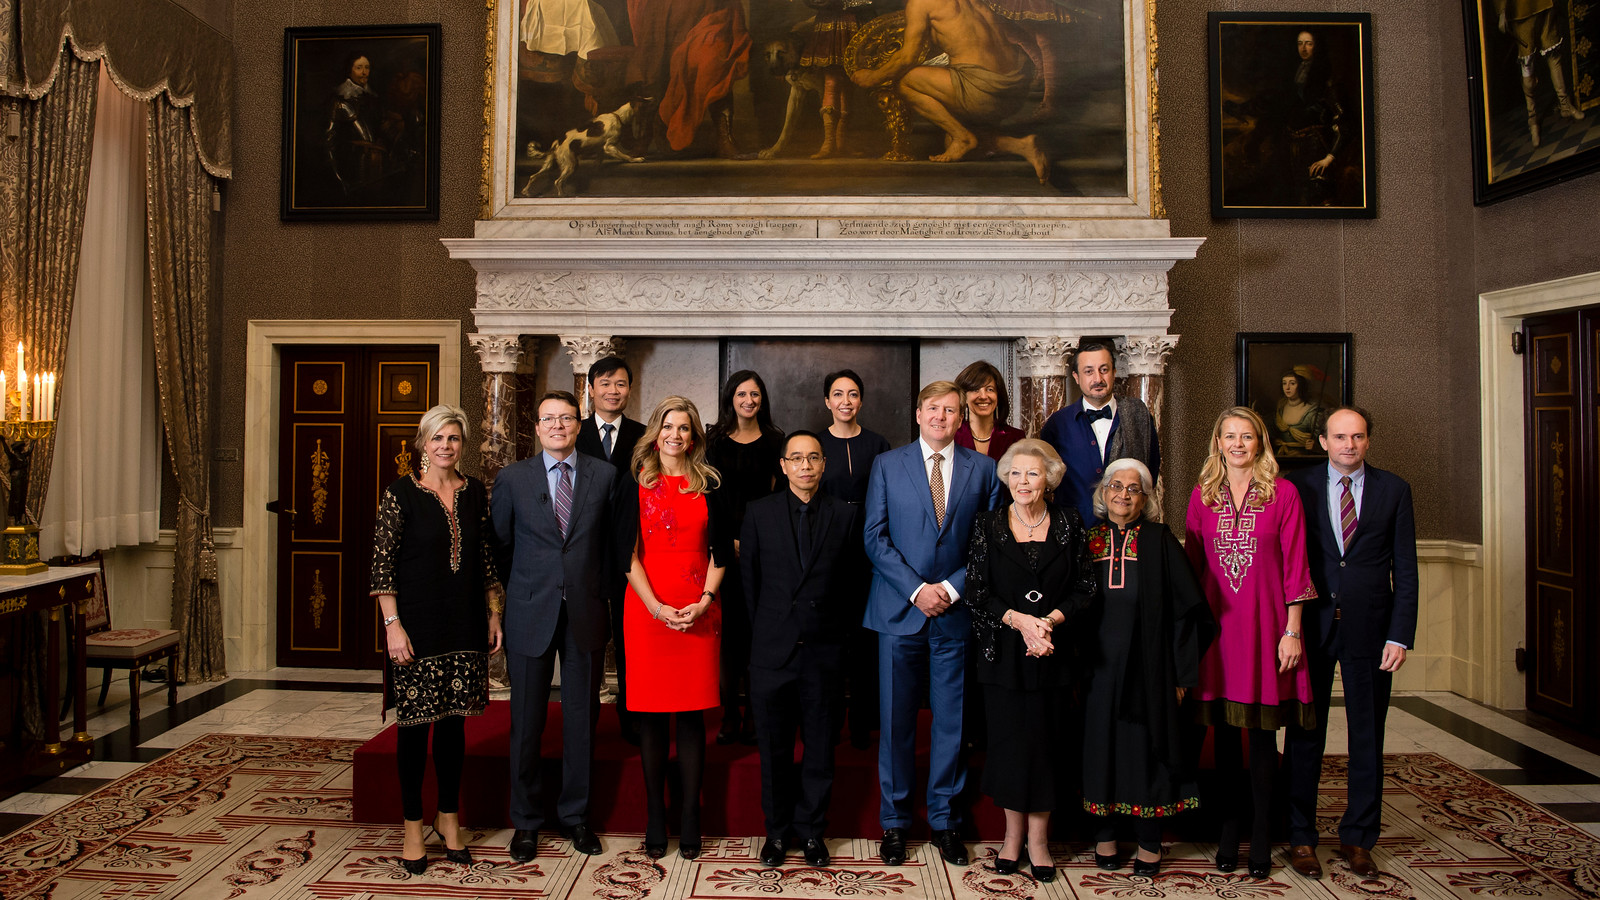 Apichatpong Weerasethakul, sixth from left, poses with Dutch prince Constantijn Aschwin, second from left, and other royals and recipients of the 2016 Prince Claus Awards on Thursday at the Royal Palace in Amsterdam. Photo: Frank van Beek / Prince Claus Fund. 